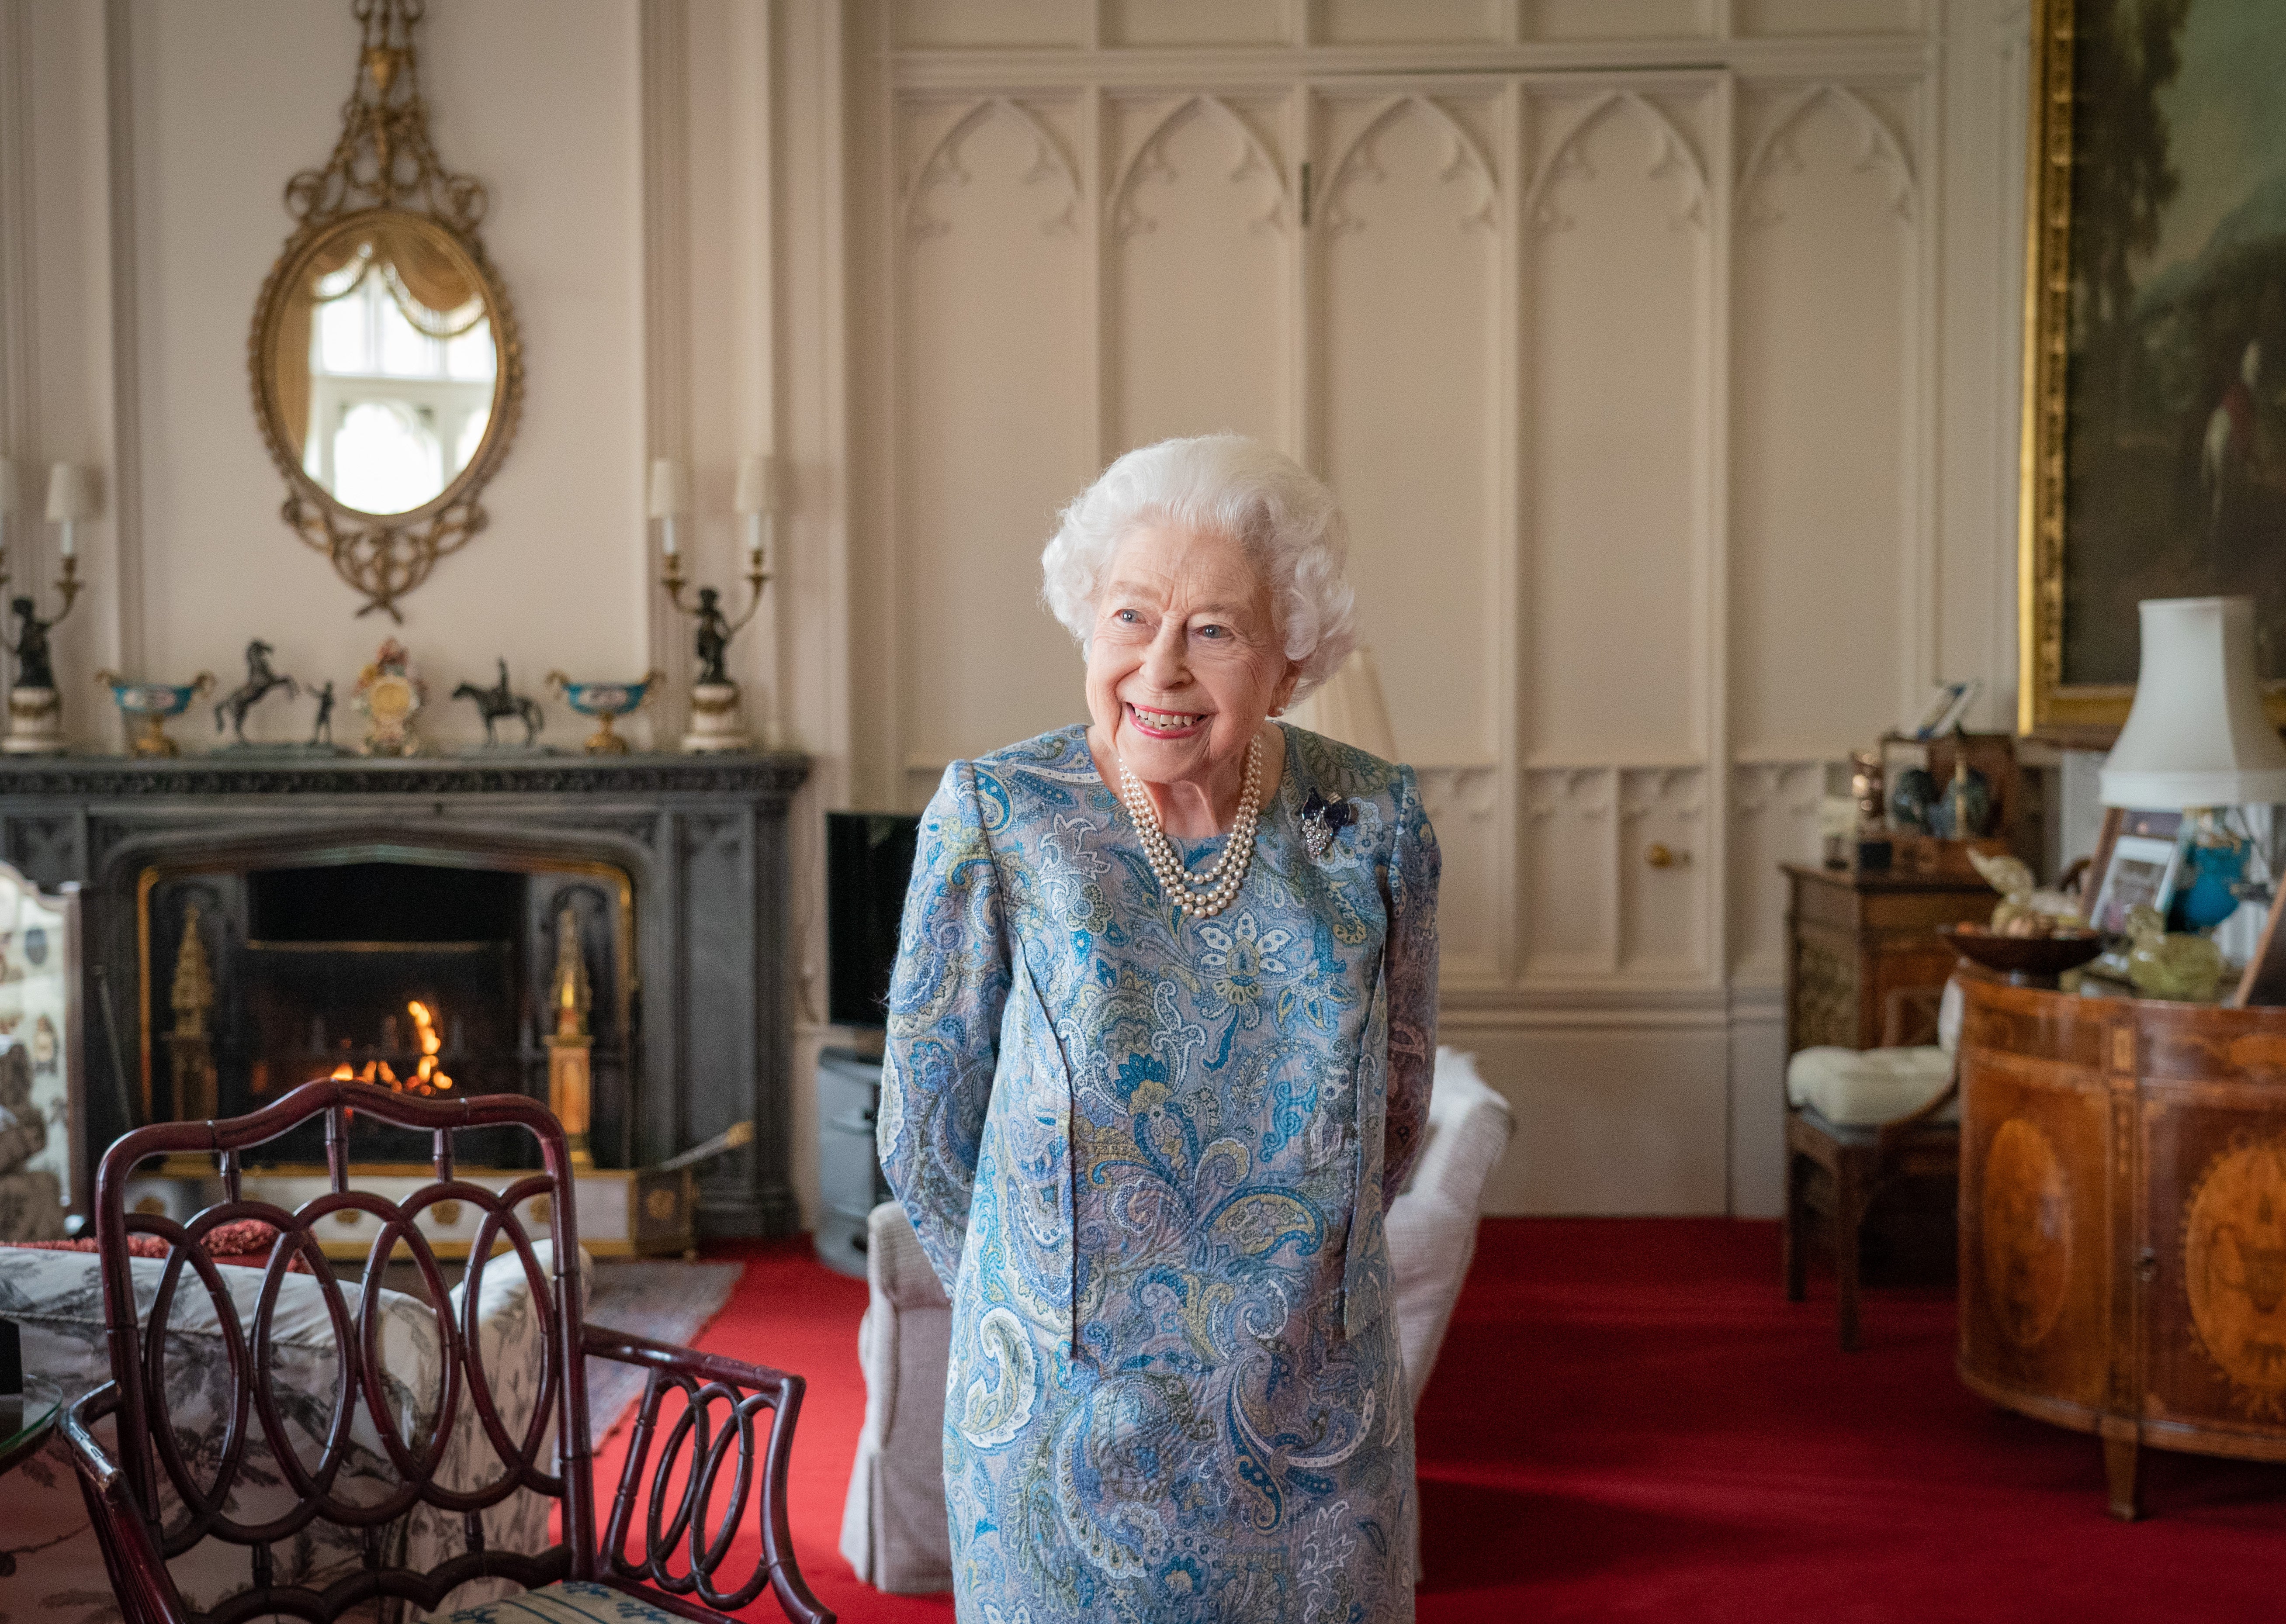 The Queen during an audience with President of Switzerland Ignazio Cassis at Windsor Castle (Dominic Lipinski/PA)